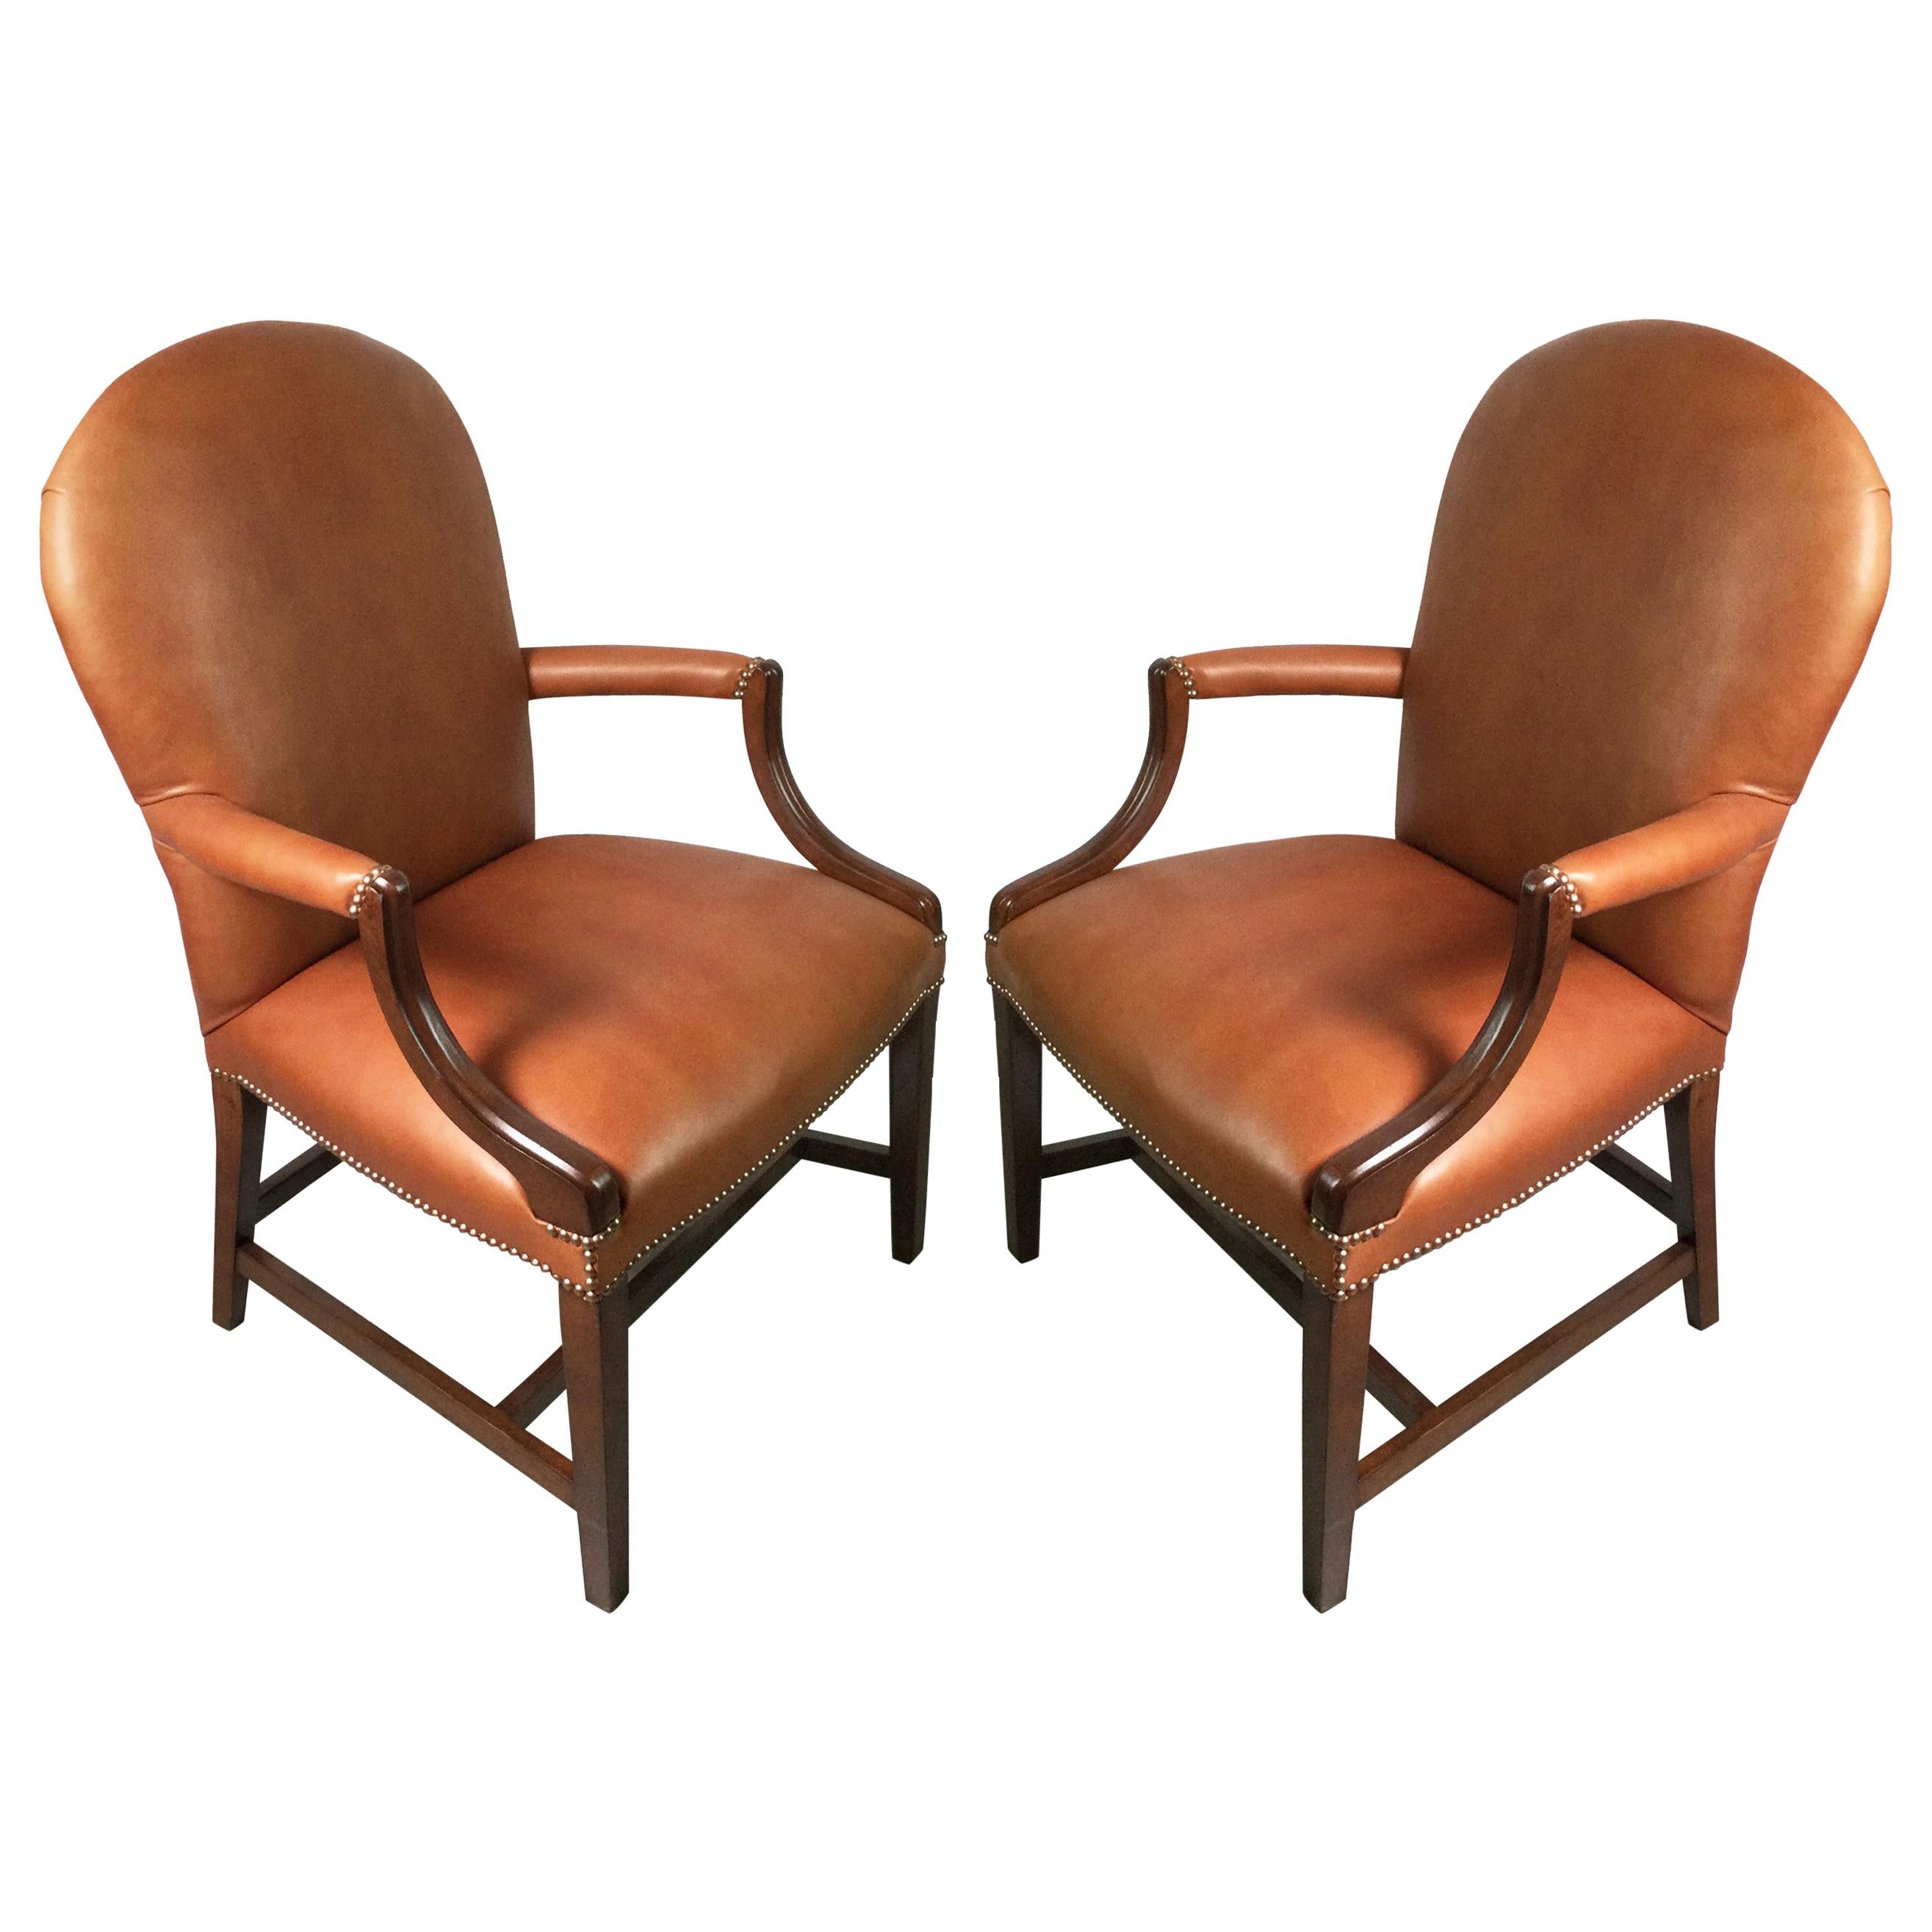 Pair of Leather and Mahogany Library Chairs